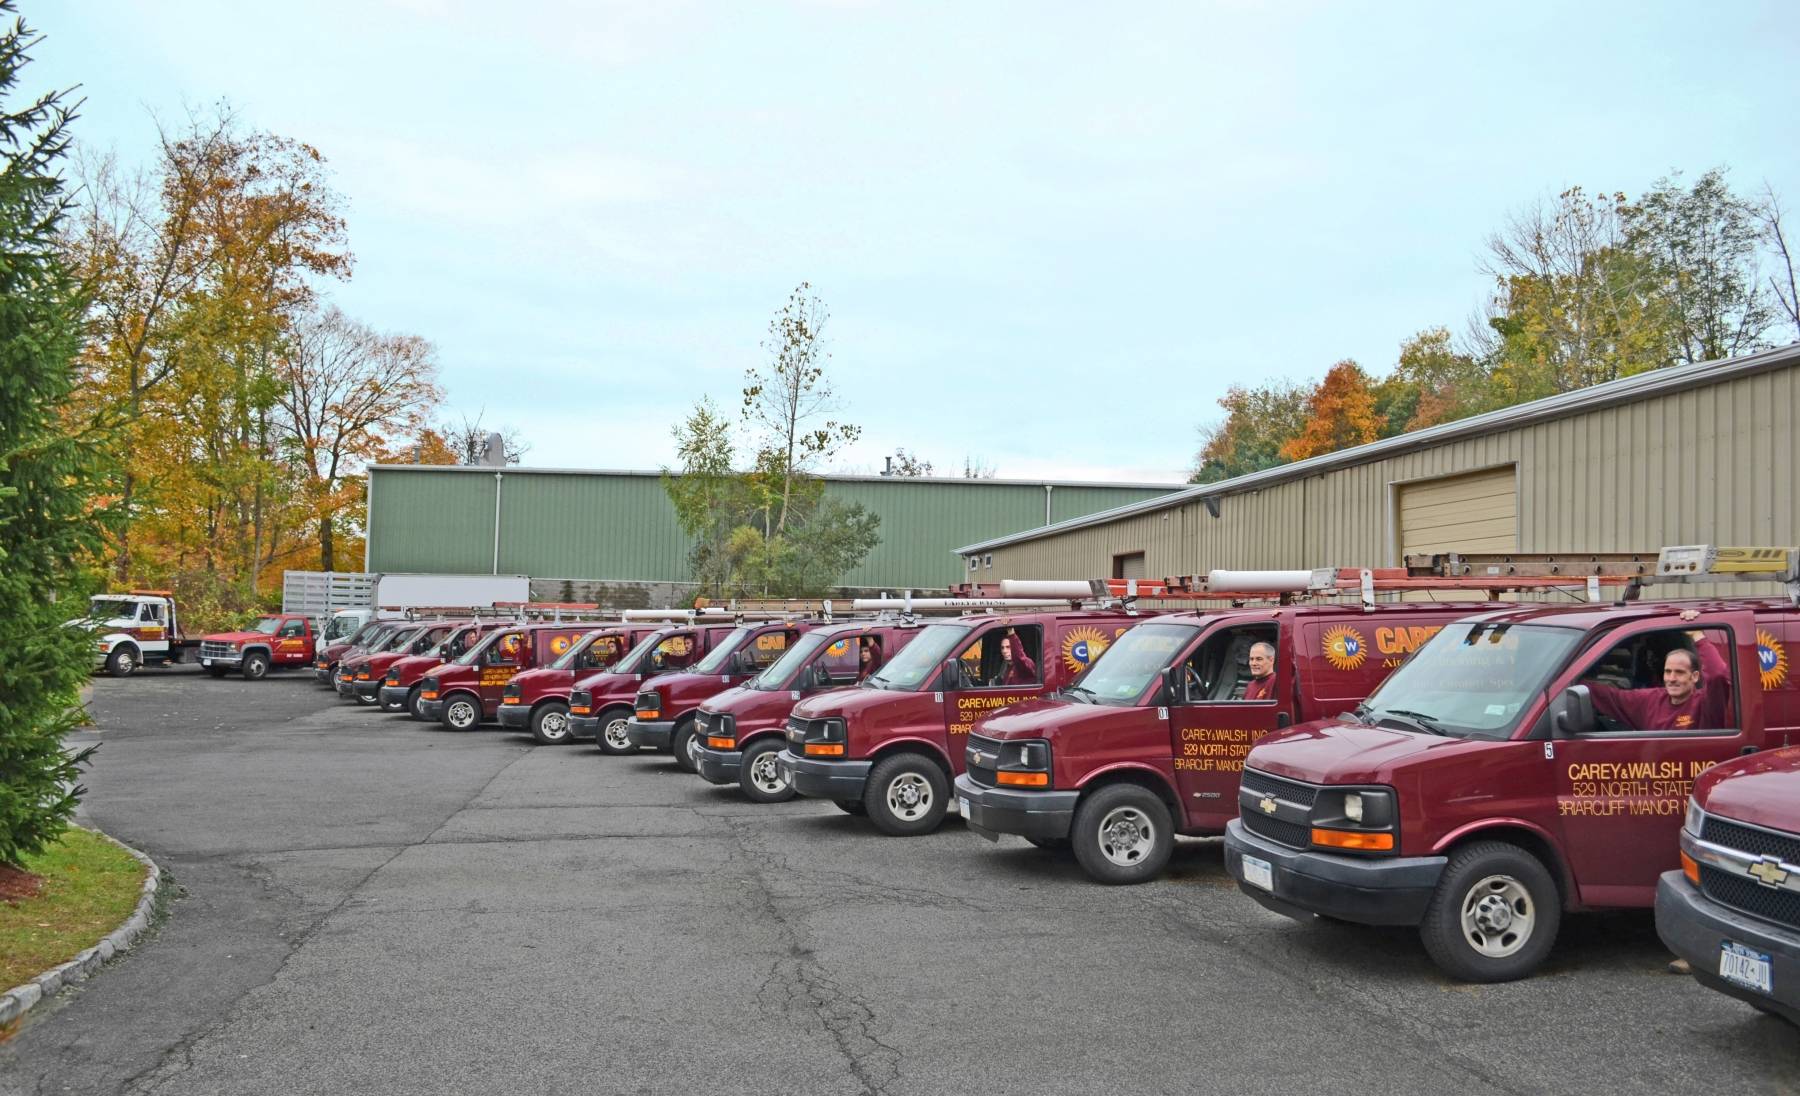 carey&walsh red service vans parking in front of the warehouse